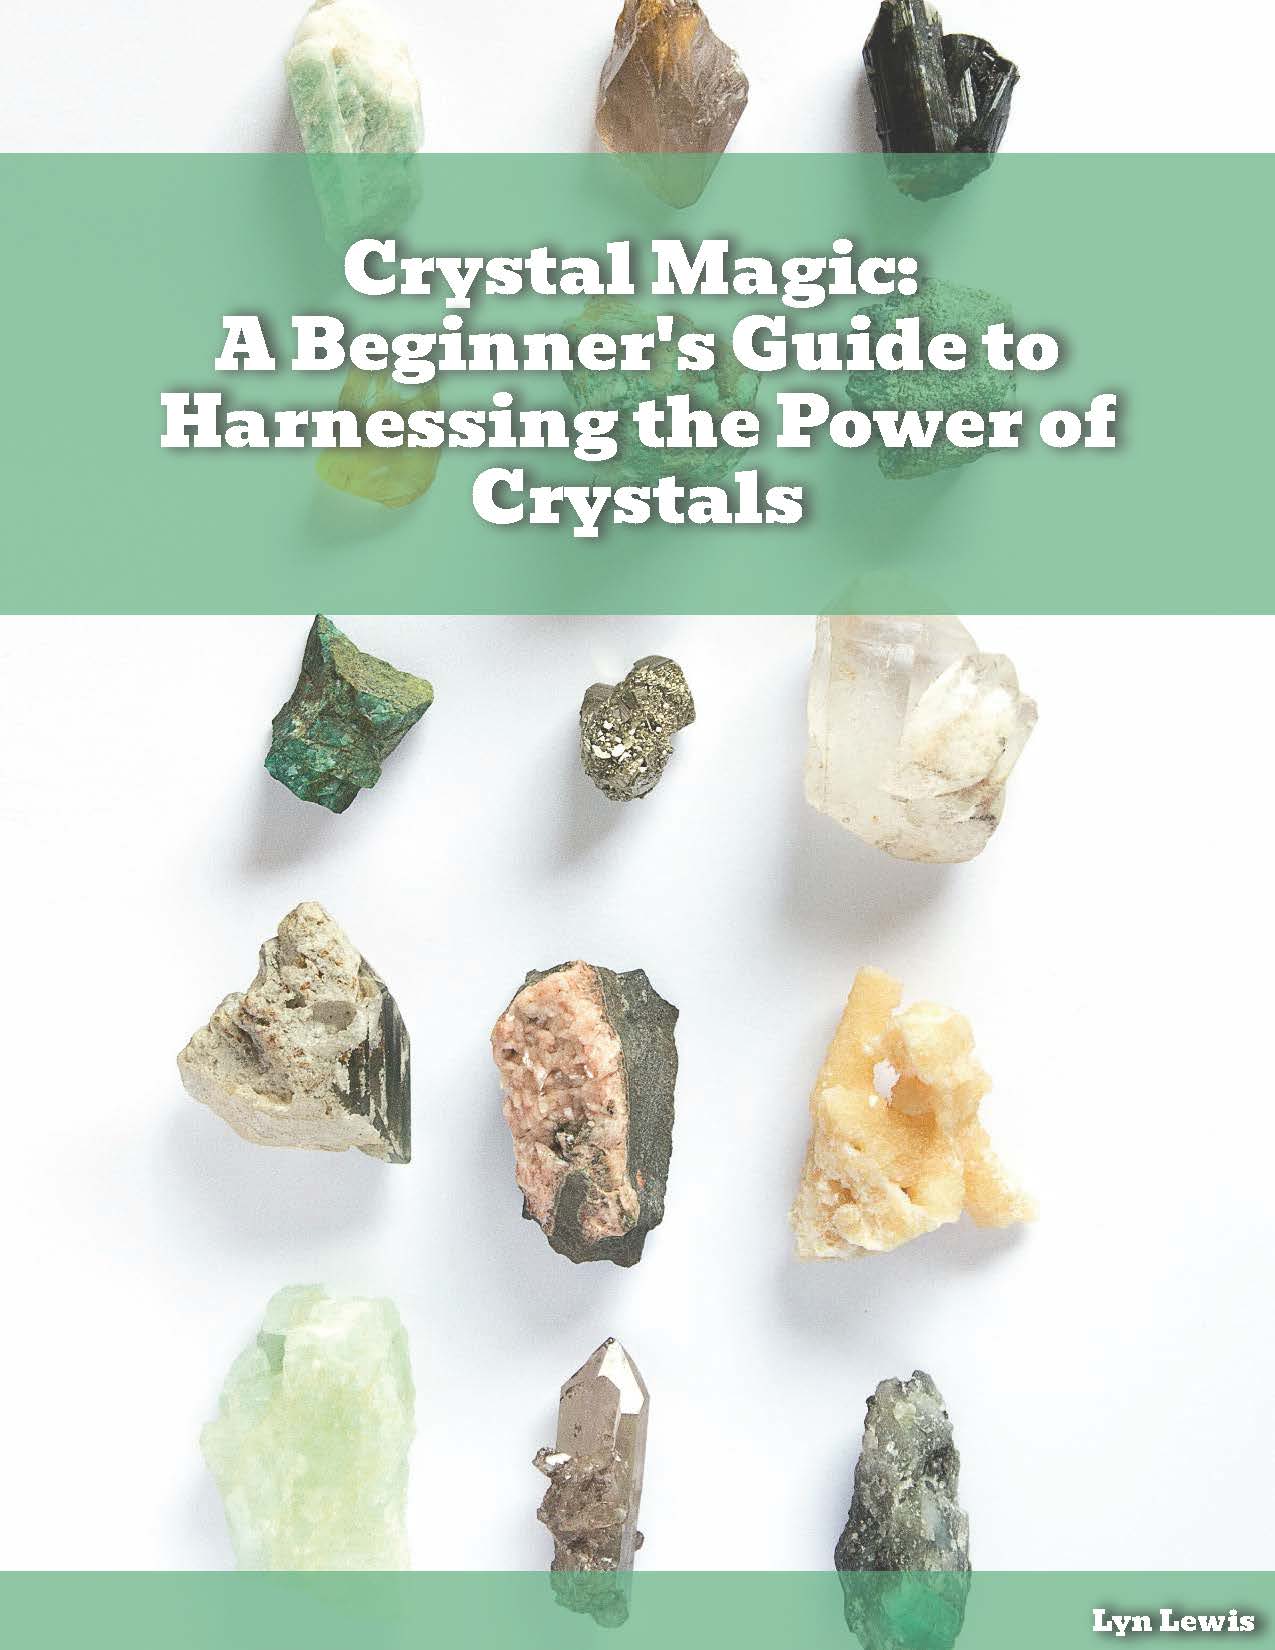 Crystal Magic - A beginners guide to harnessing the power of crystals